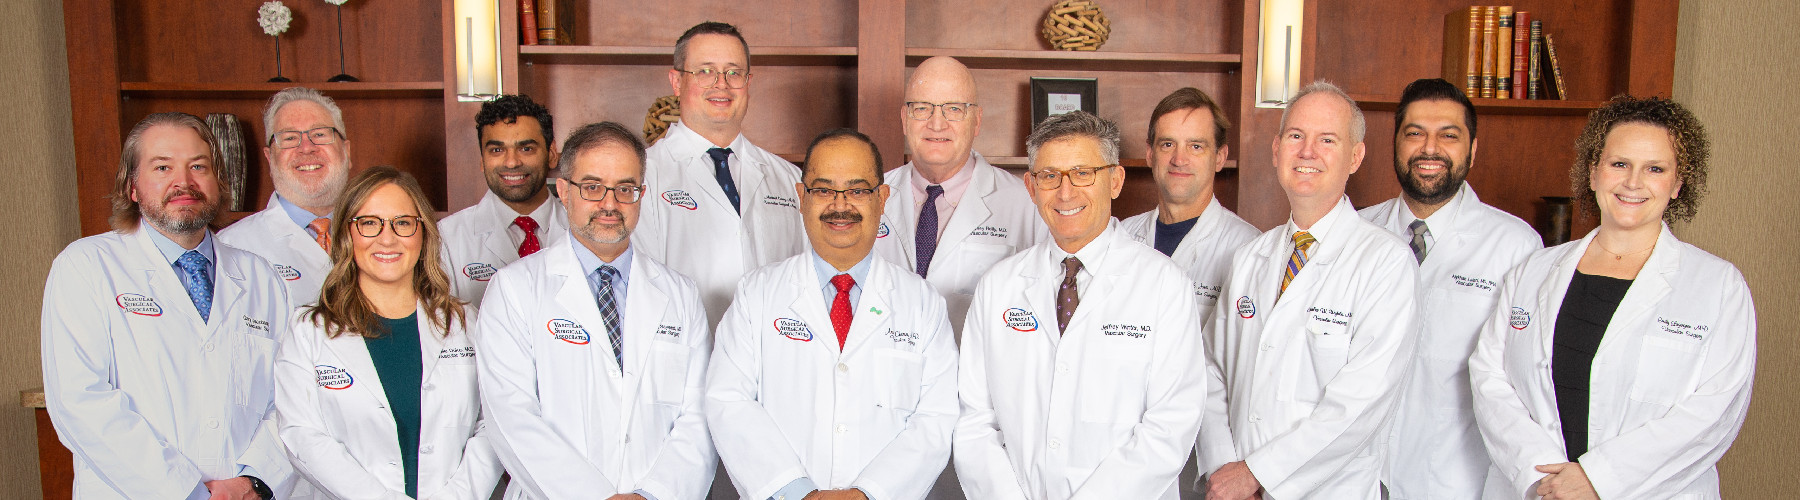 The surgeons with Vascular Surgical Associates